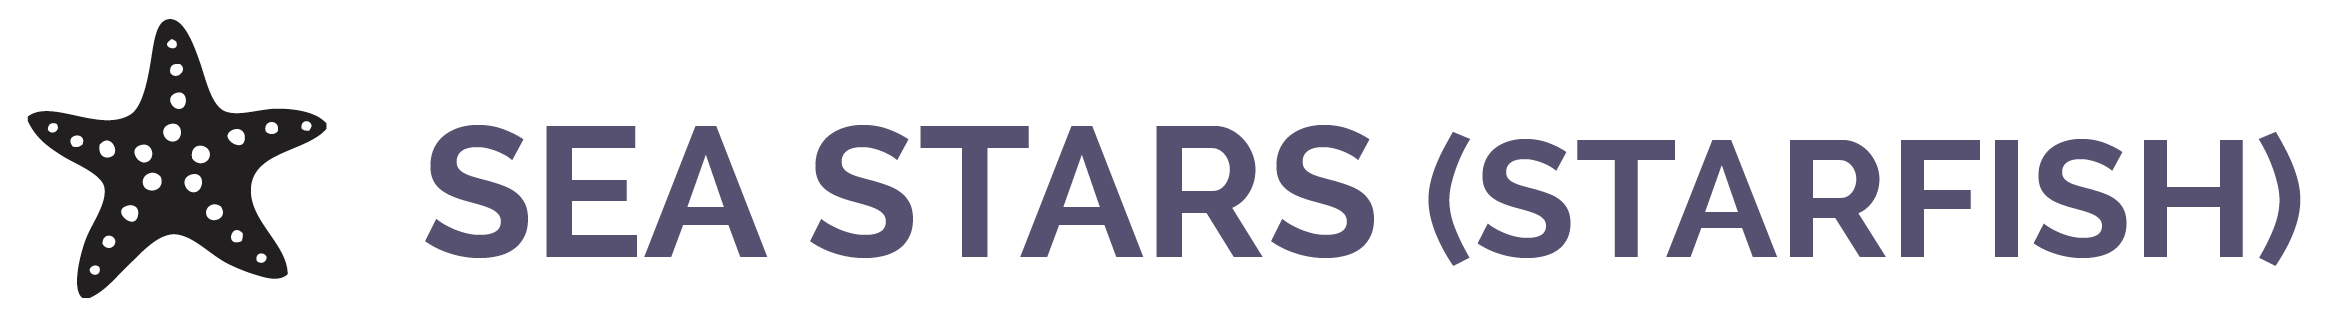 Image shows the words "Sea Stars (Starfish)" and shows a cartoon of a sea star.